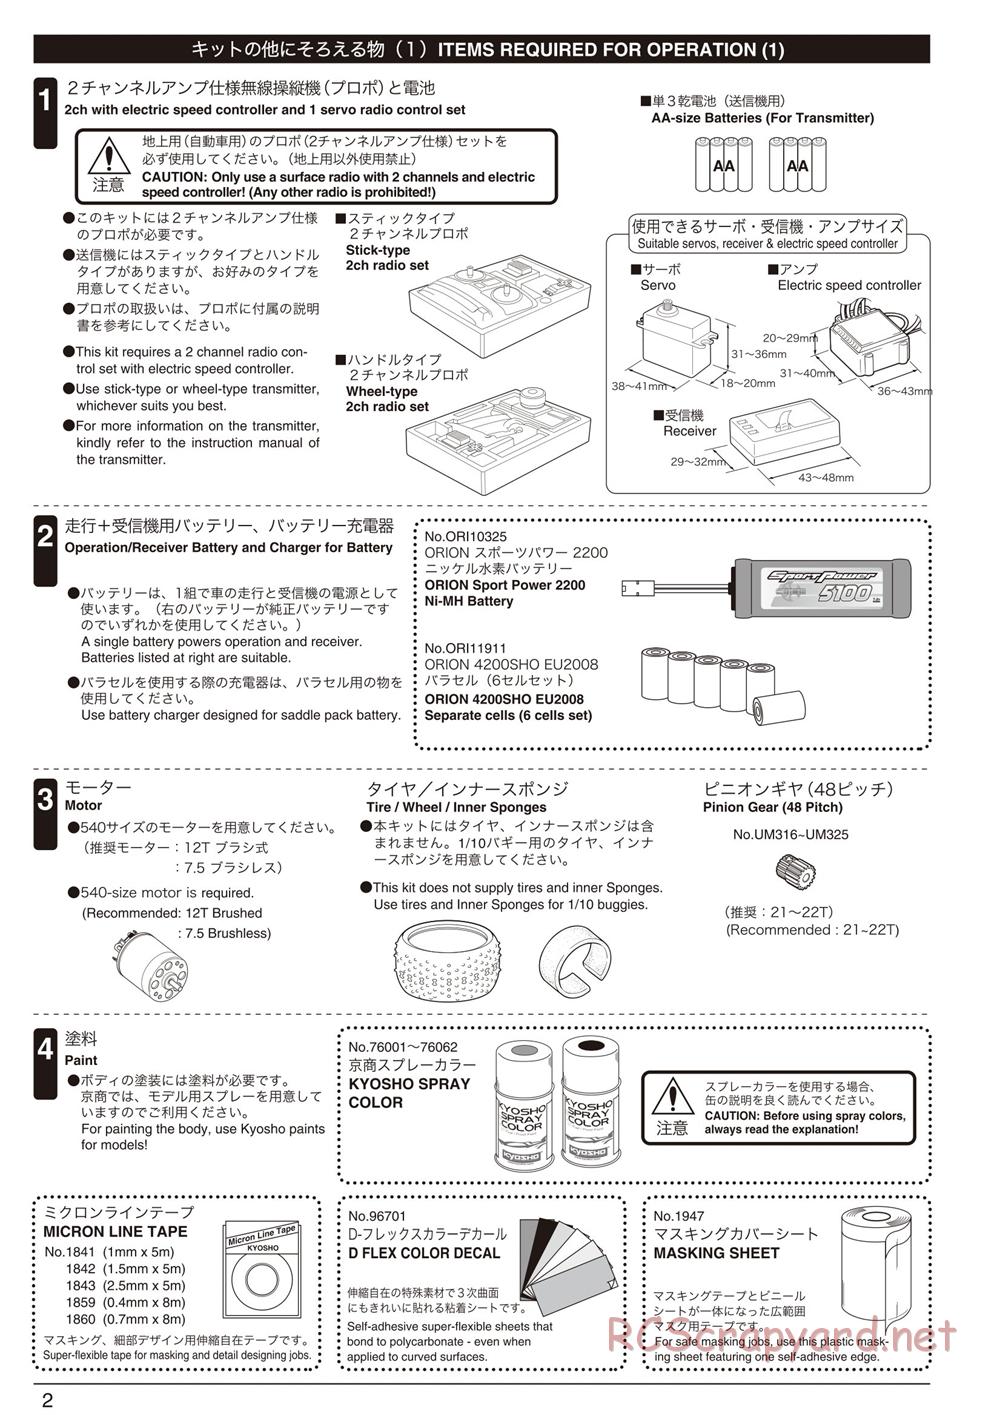 Kyosho - Ultima RB5 SP - Manual - Page 2